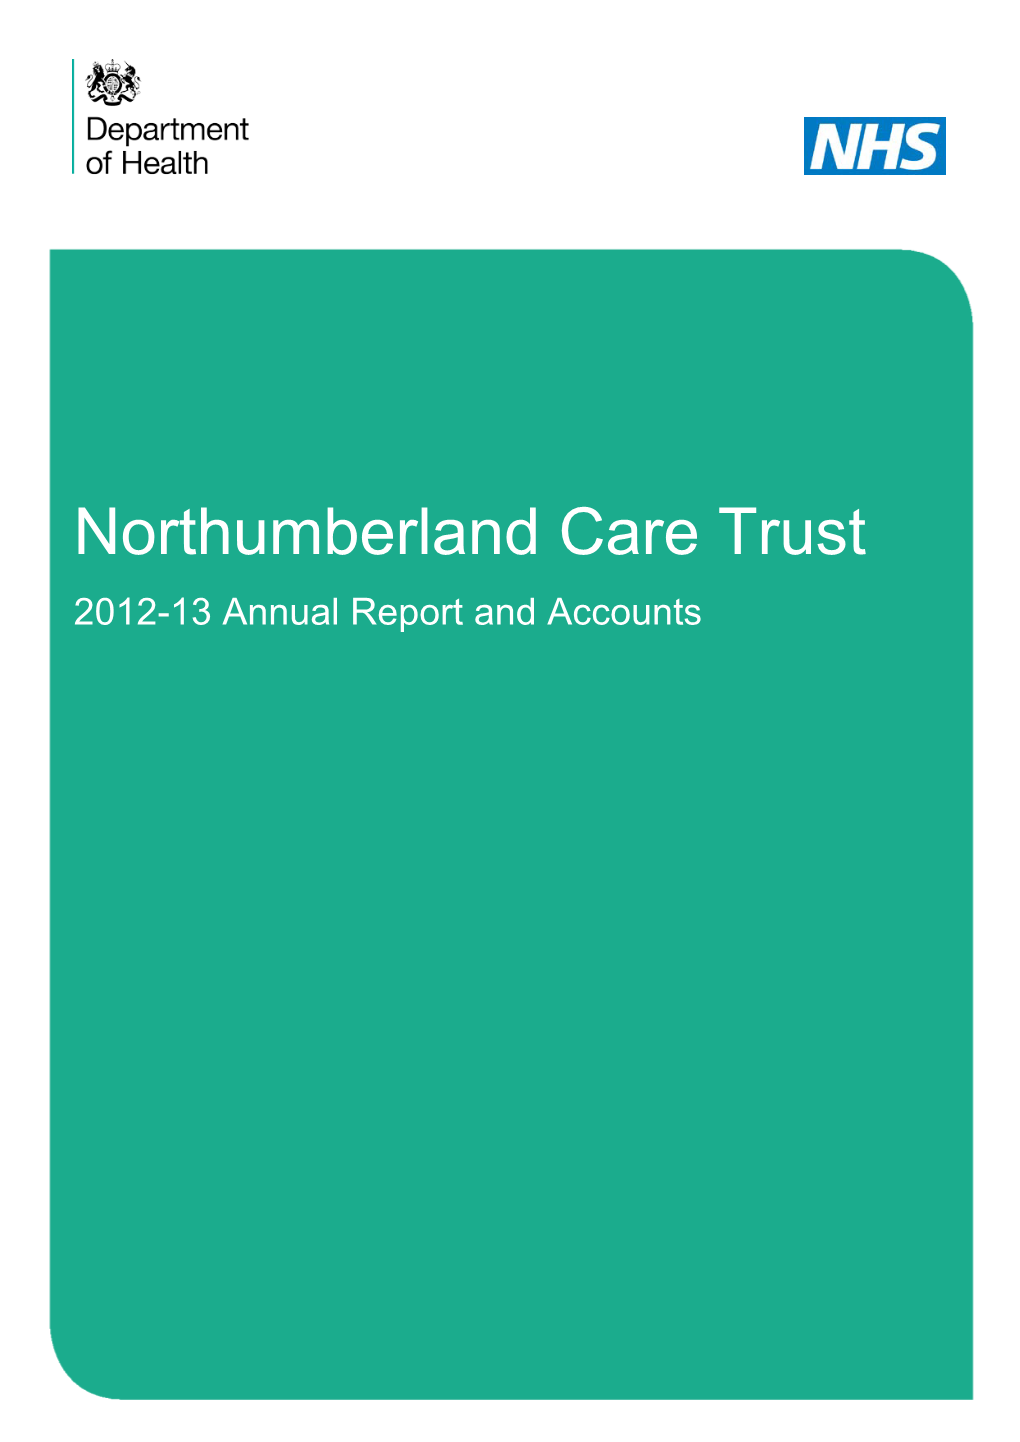 Northumberland Care Trust 2012-13 Annual Report and Accounts